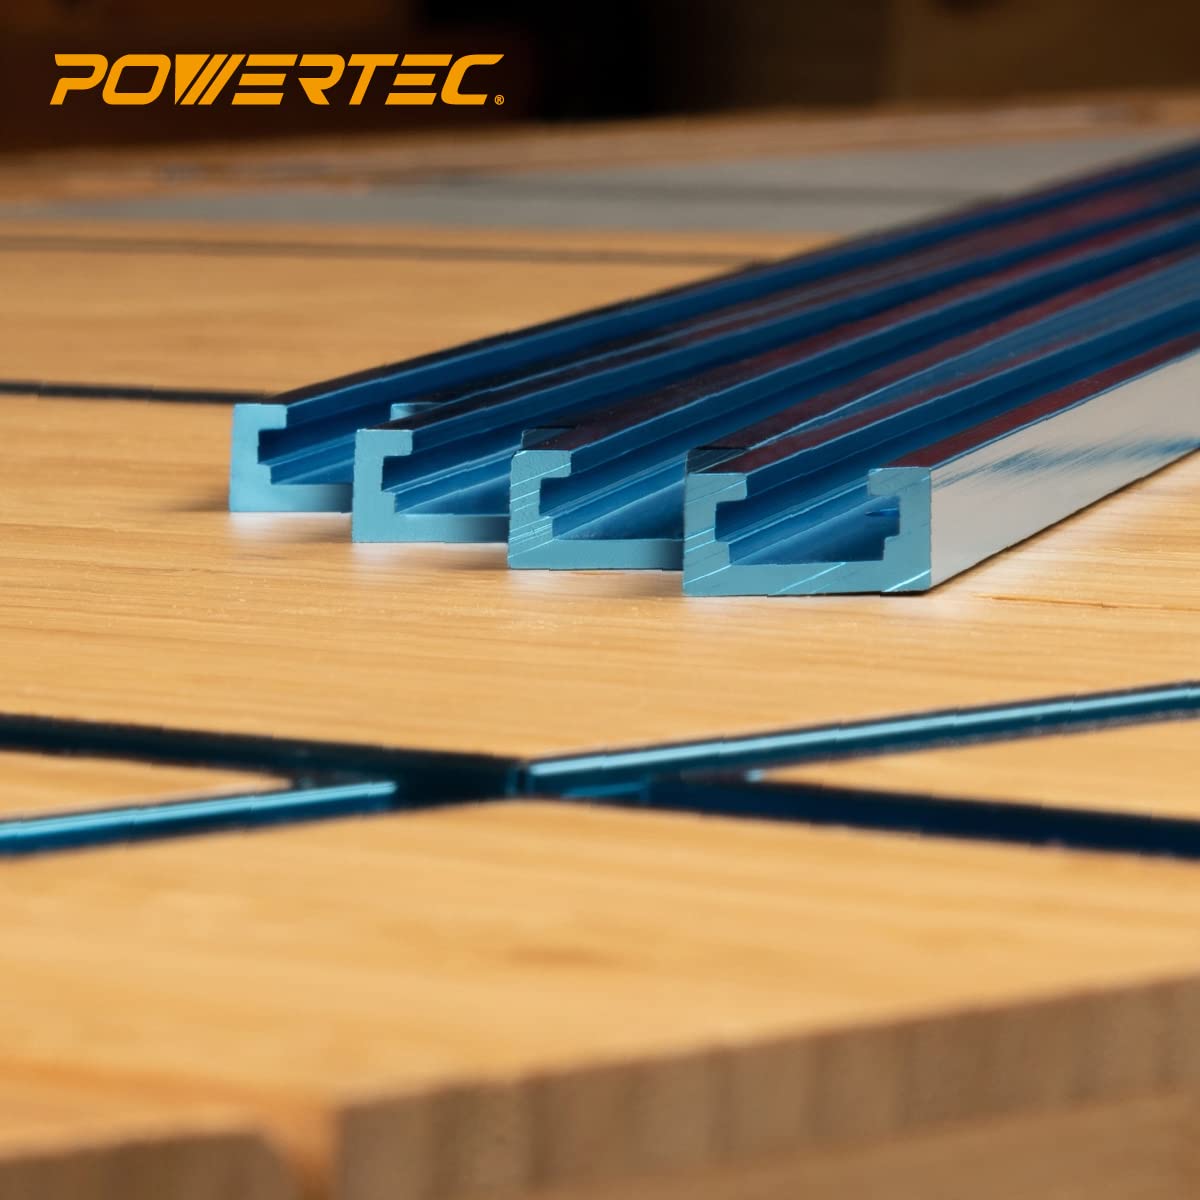 POWERTEC 71158-P3, 6 Pack, Double-Cut Profile Universal T-Track with Predrilled Mounting Holes, Aluminum T Track for Woodworking Jigs and Fixtures,